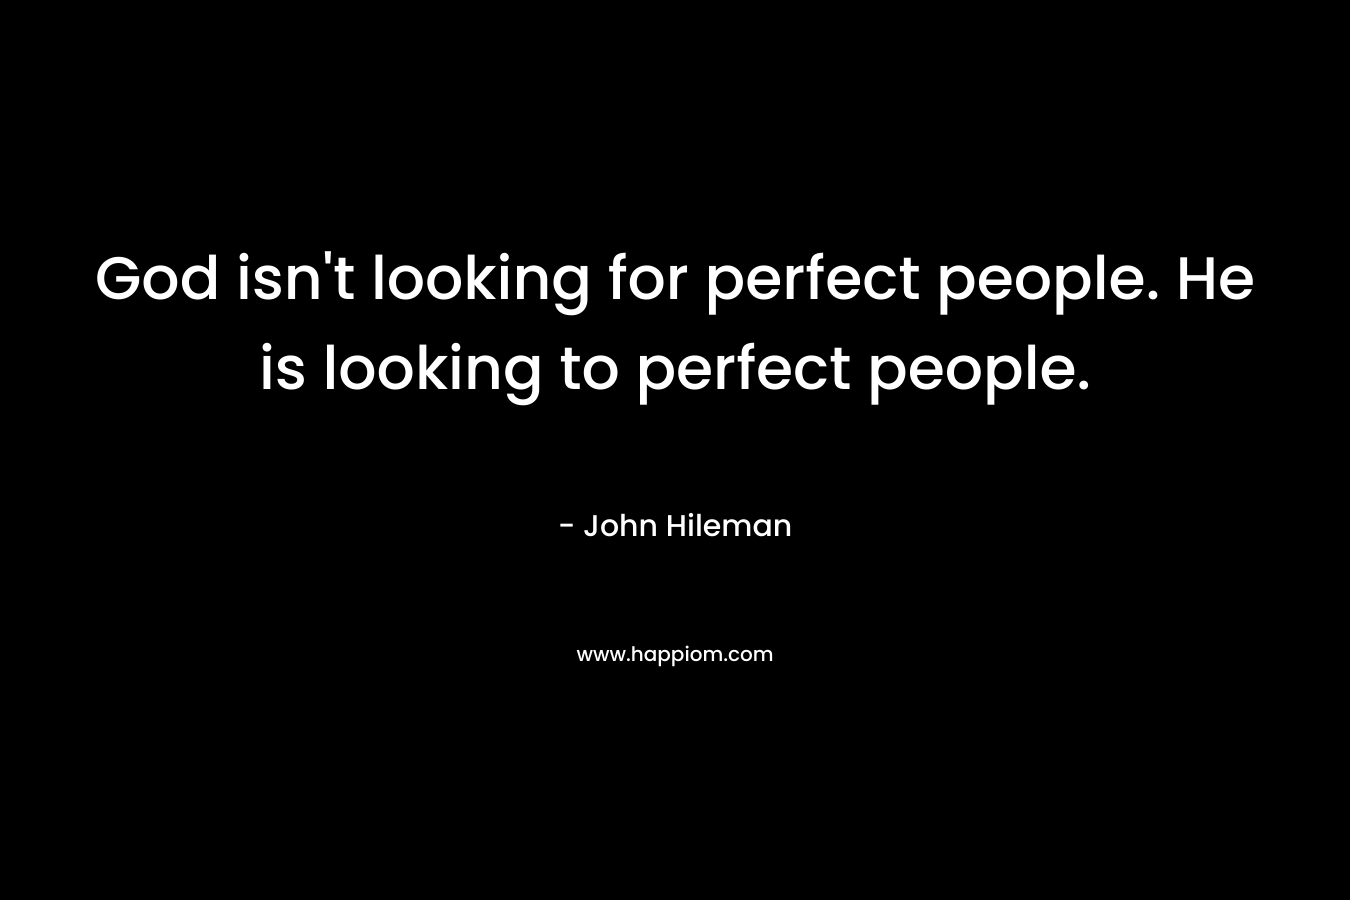 God isn't looking for perfect people. He is looking to perfect people.